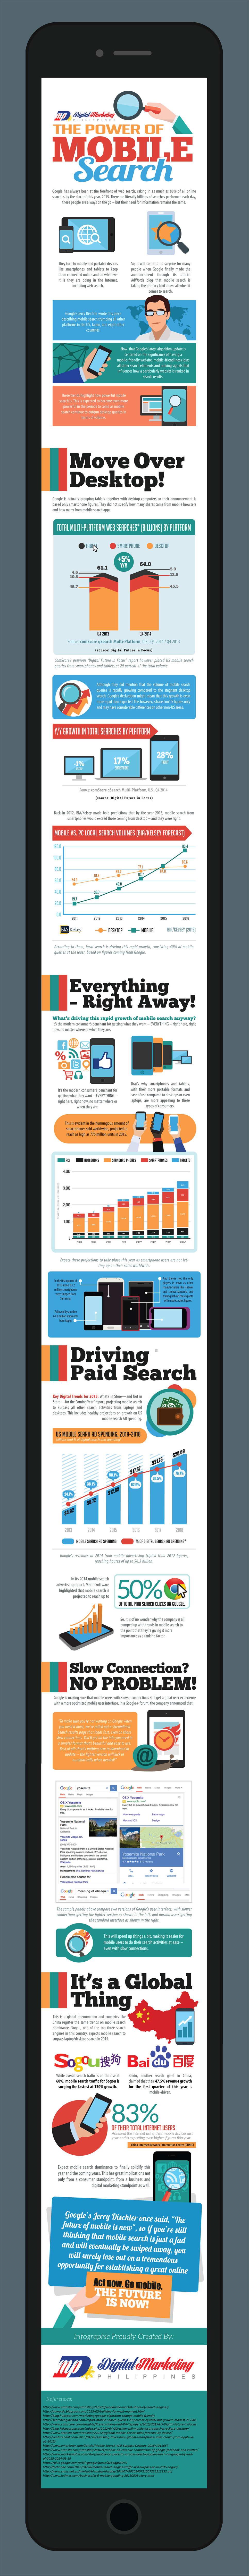 The-Power-of-Mobile-Search